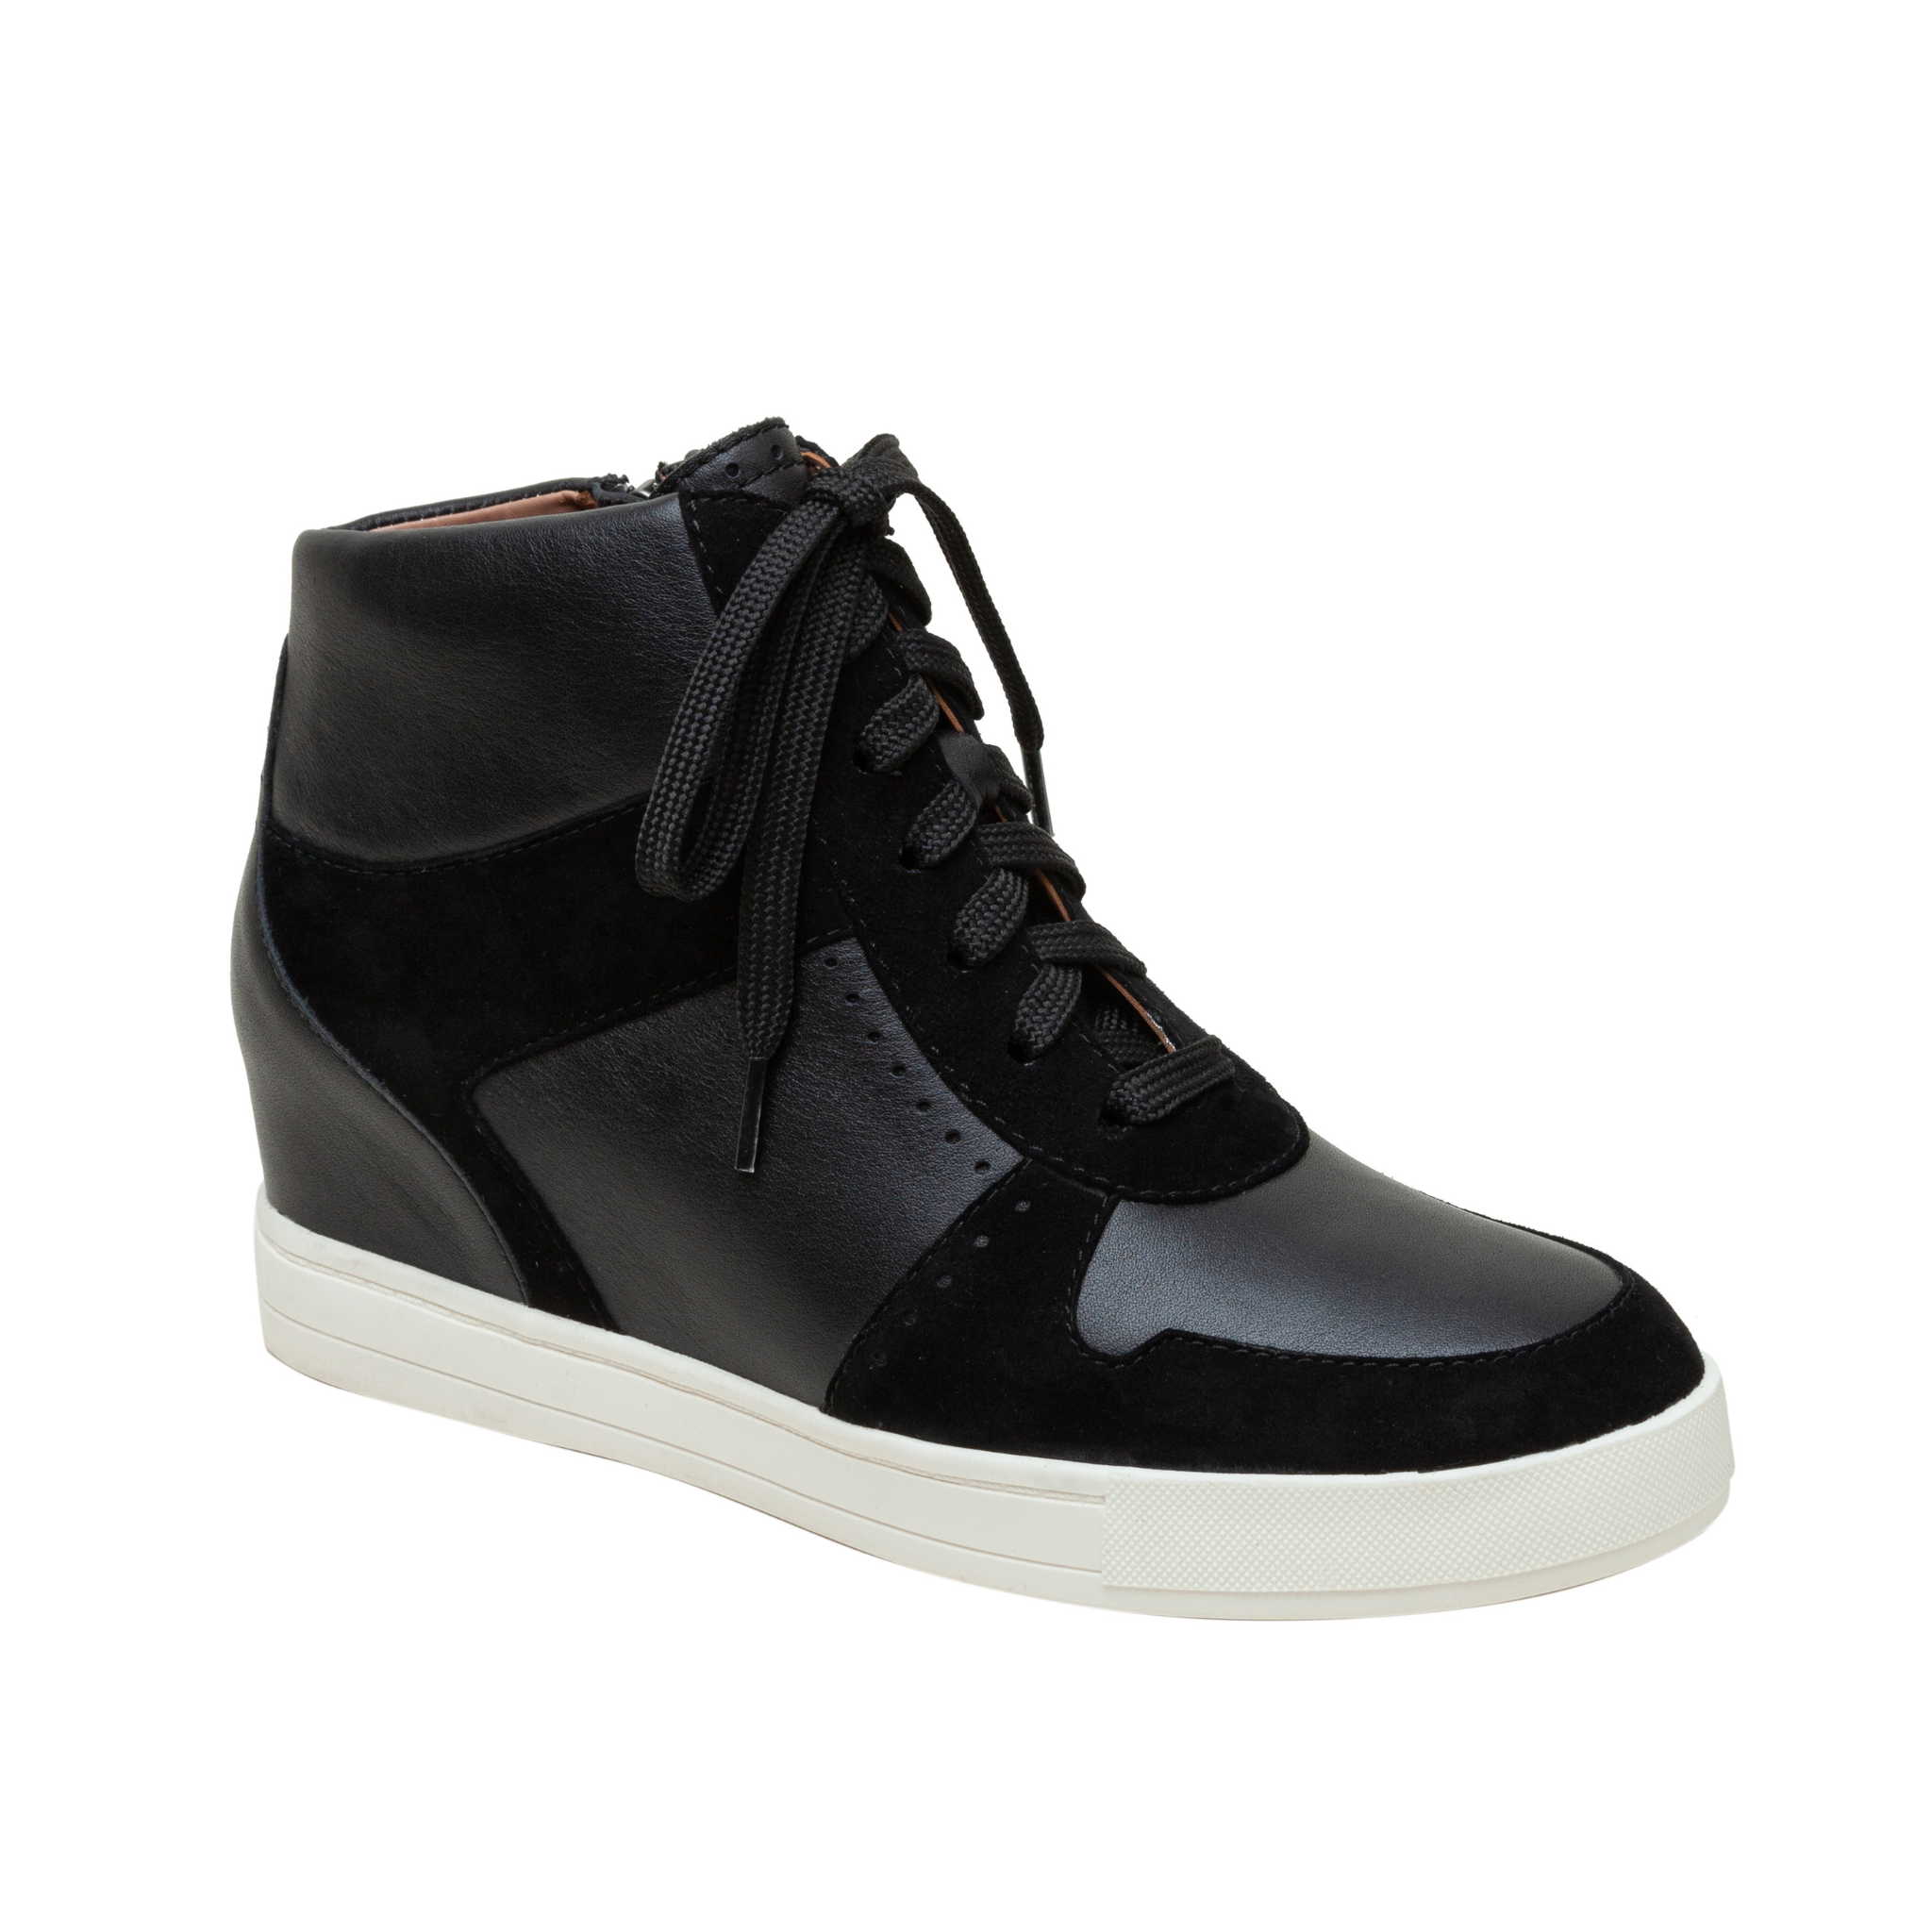 ISABEL MARANT Buckee suede and leather wedge sneakers | NET-A-PORTER